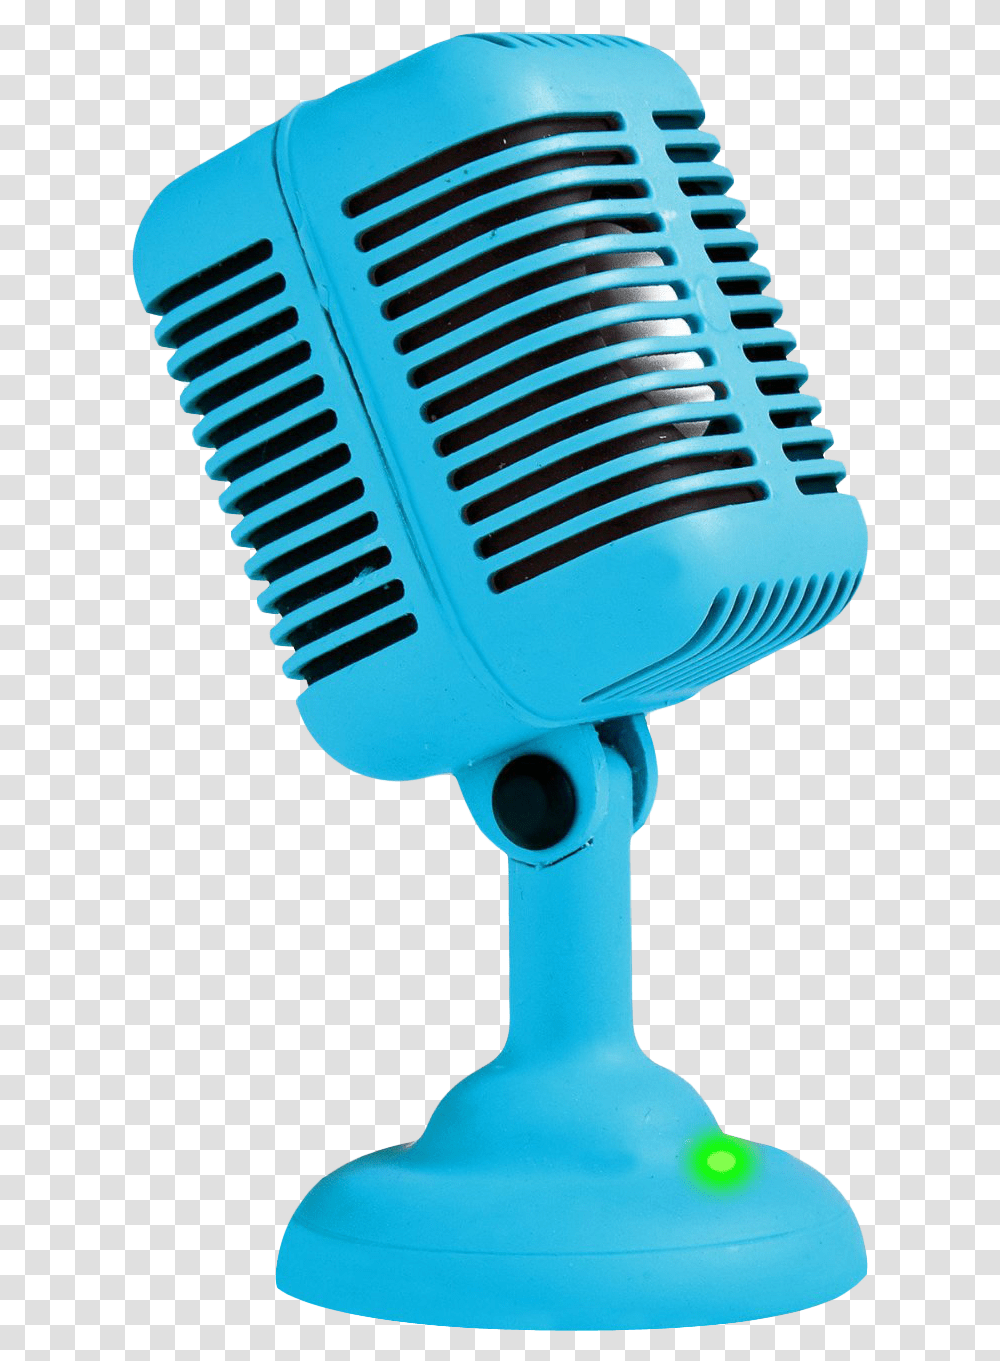 Blue Microphones, Electrical Device, Fire Hydrant Transparent Png